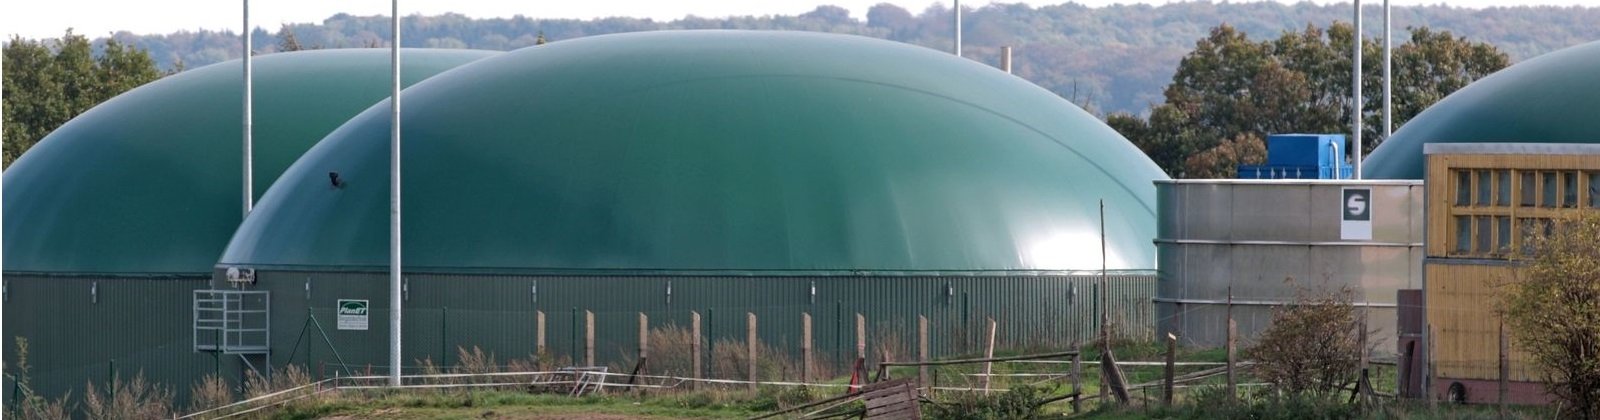 INSTALLATIONS FOR BIOGAS